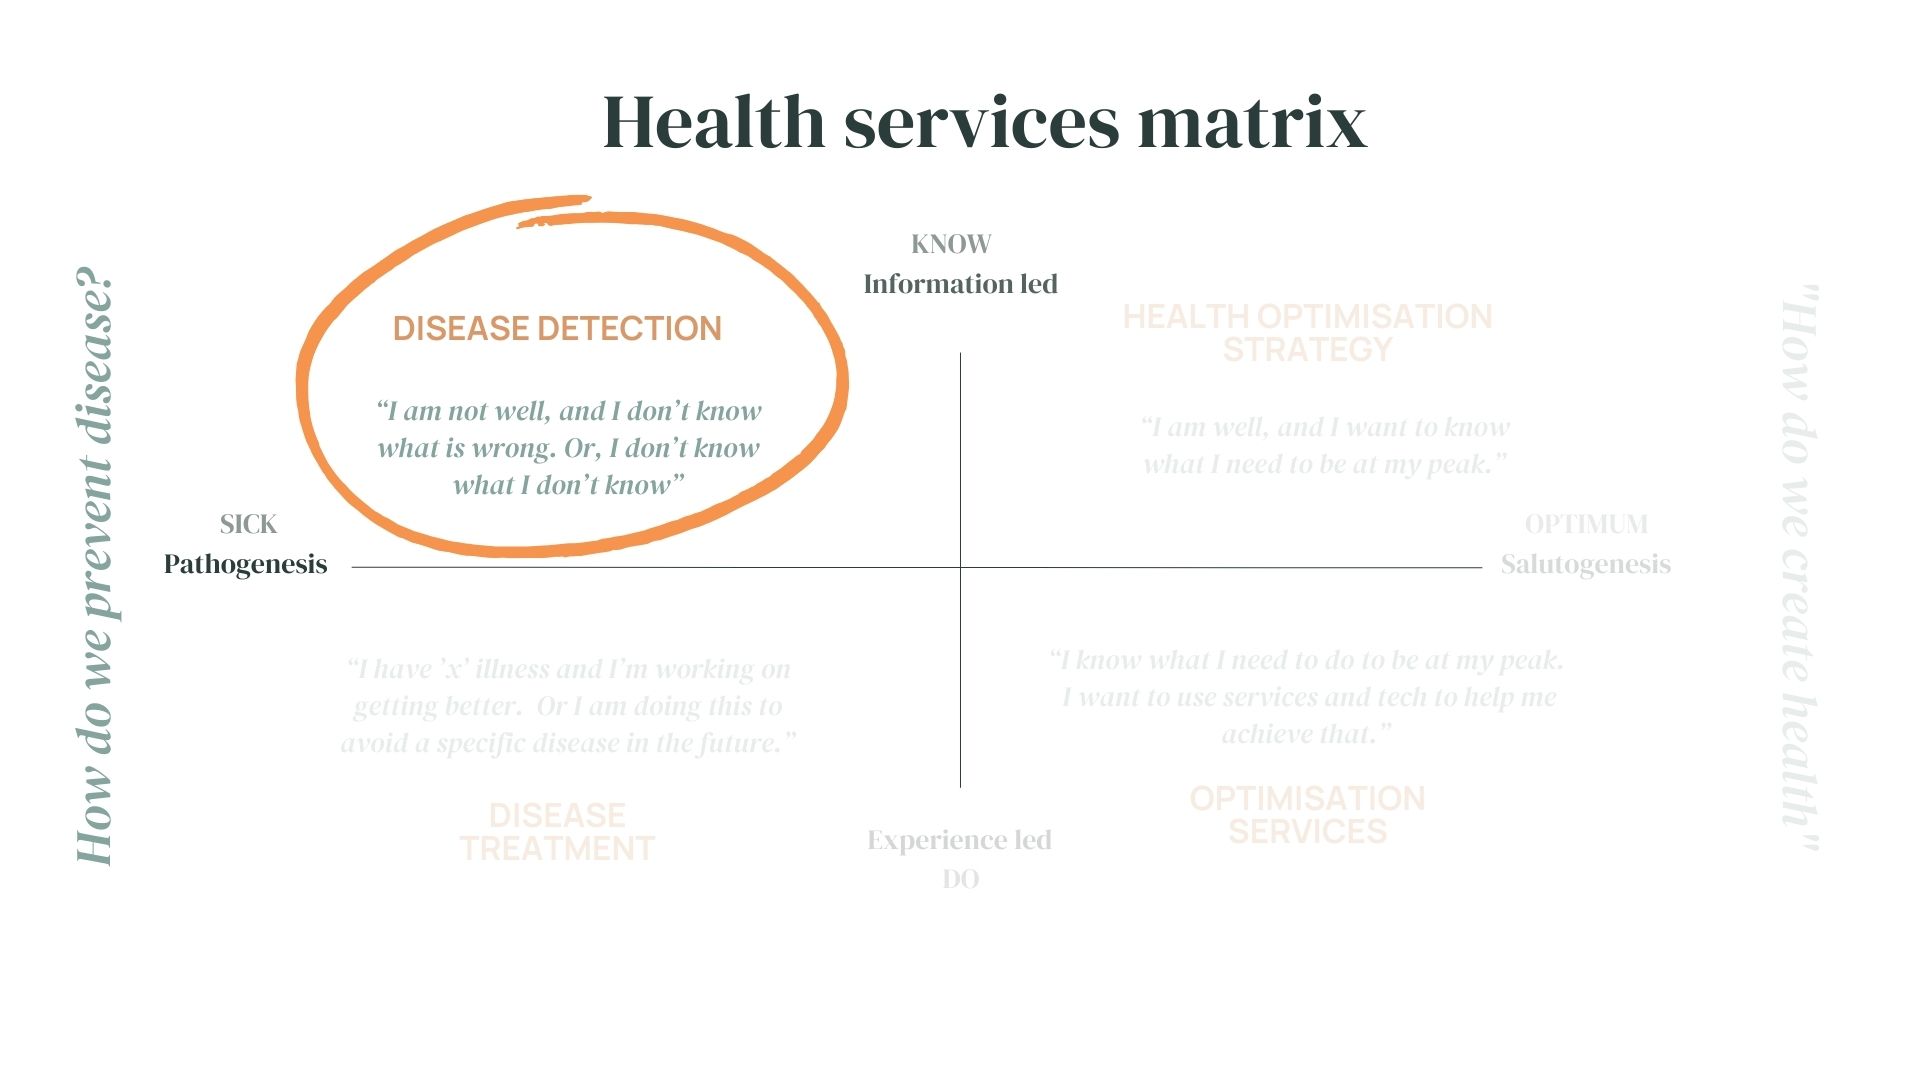 zoomed in section of health services matrix focusing on disease detection